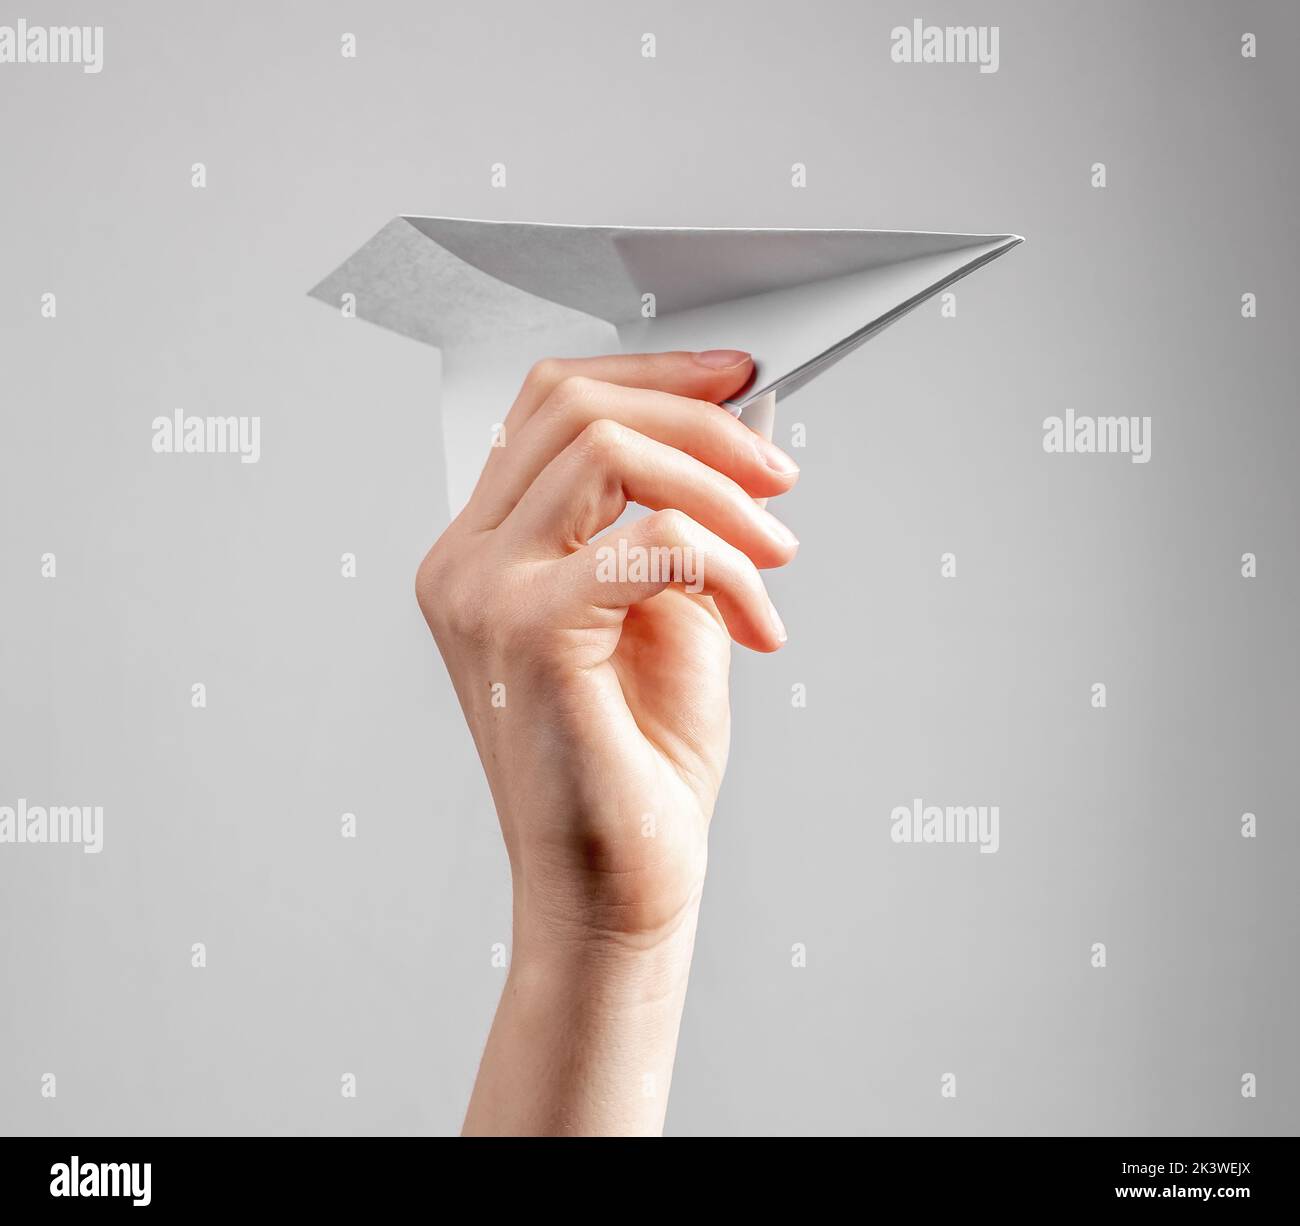 Paper plane toy in hand close up. High quality photo Stock Photo